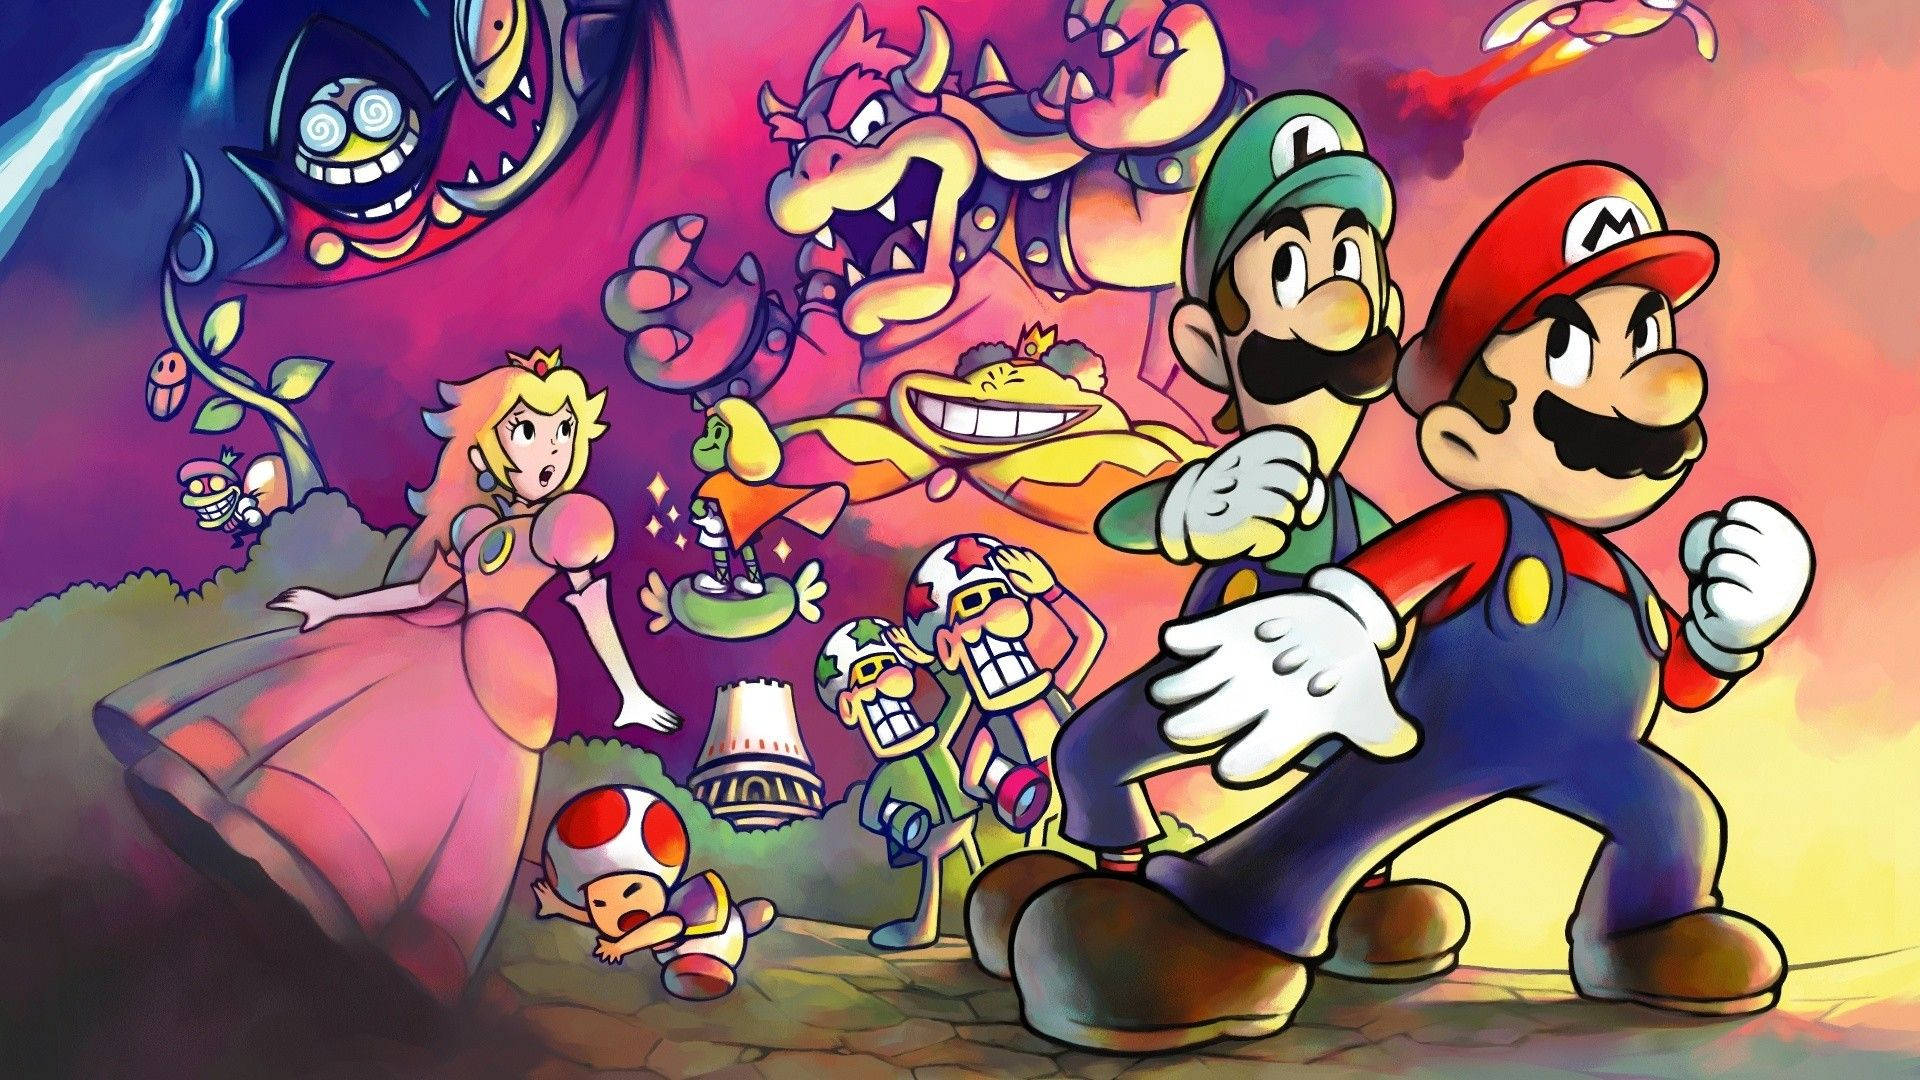 Mario and Luigi race to find the Princess! Wallpaper